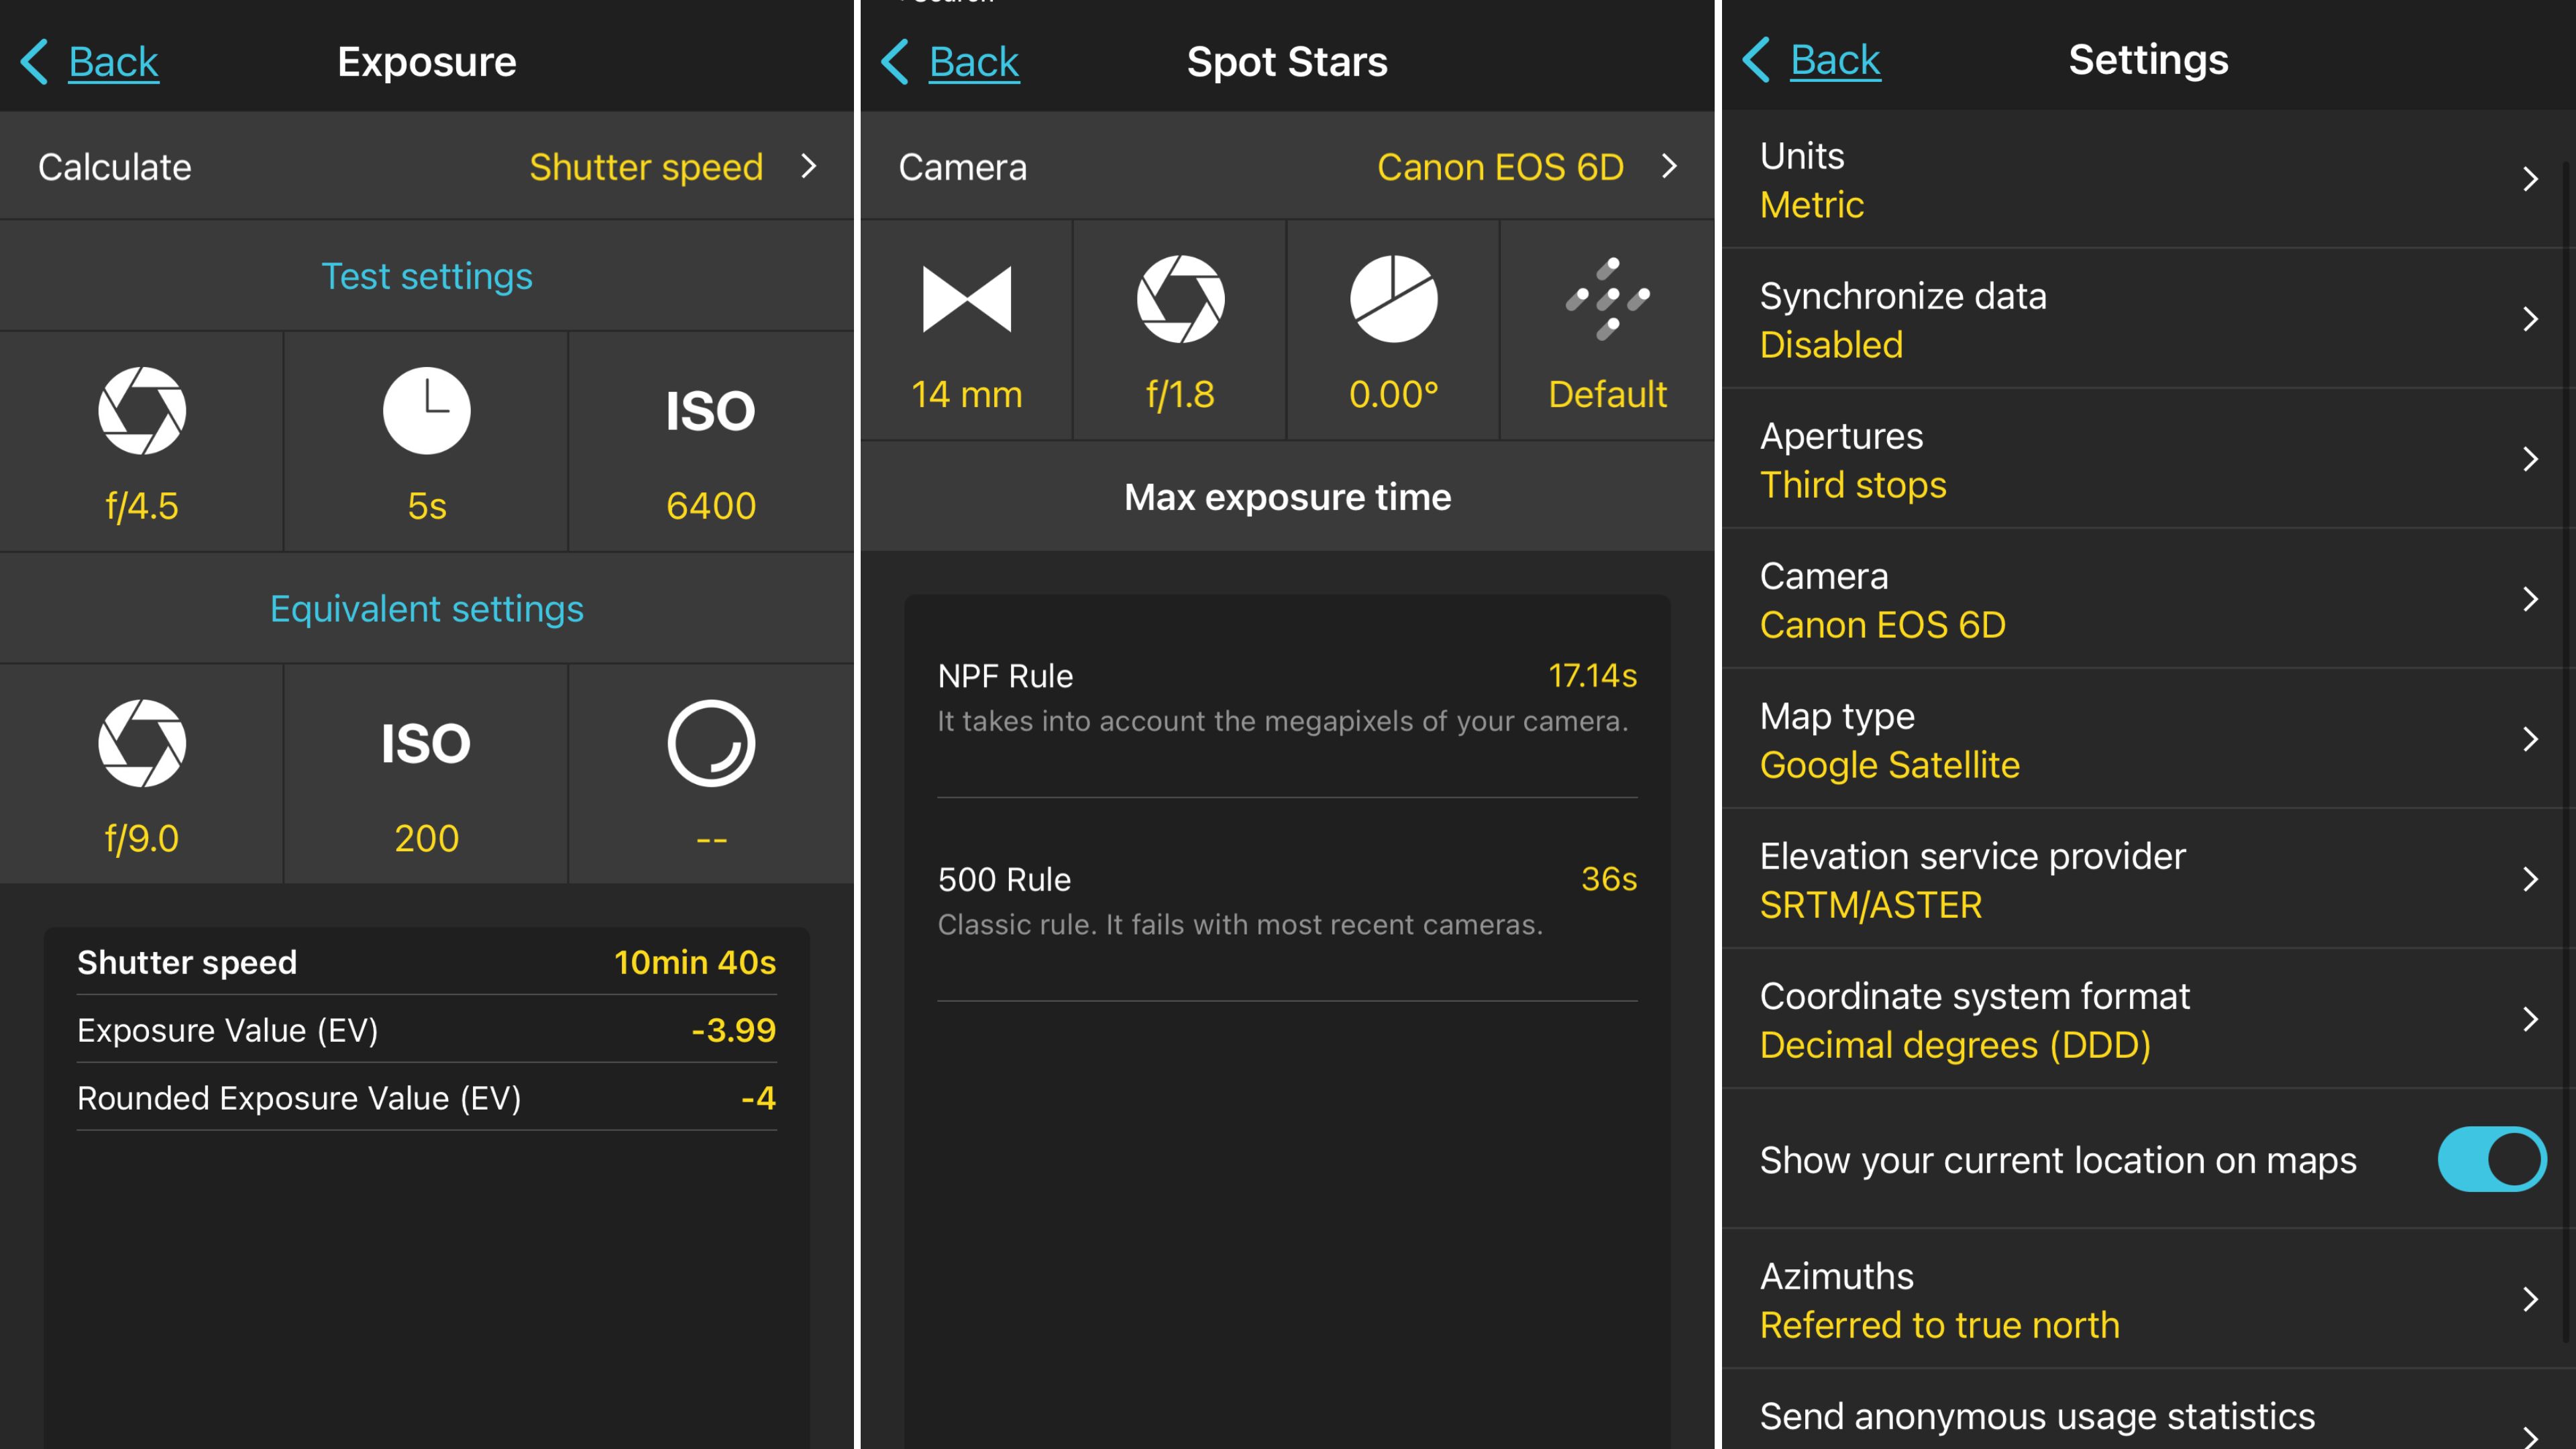 Screens from the app showing the exposure calculator with icons representing the f-number and shutter speed. A screen on the right-hand side shows the general settings page with options to change settings such as the units, camera and map type.